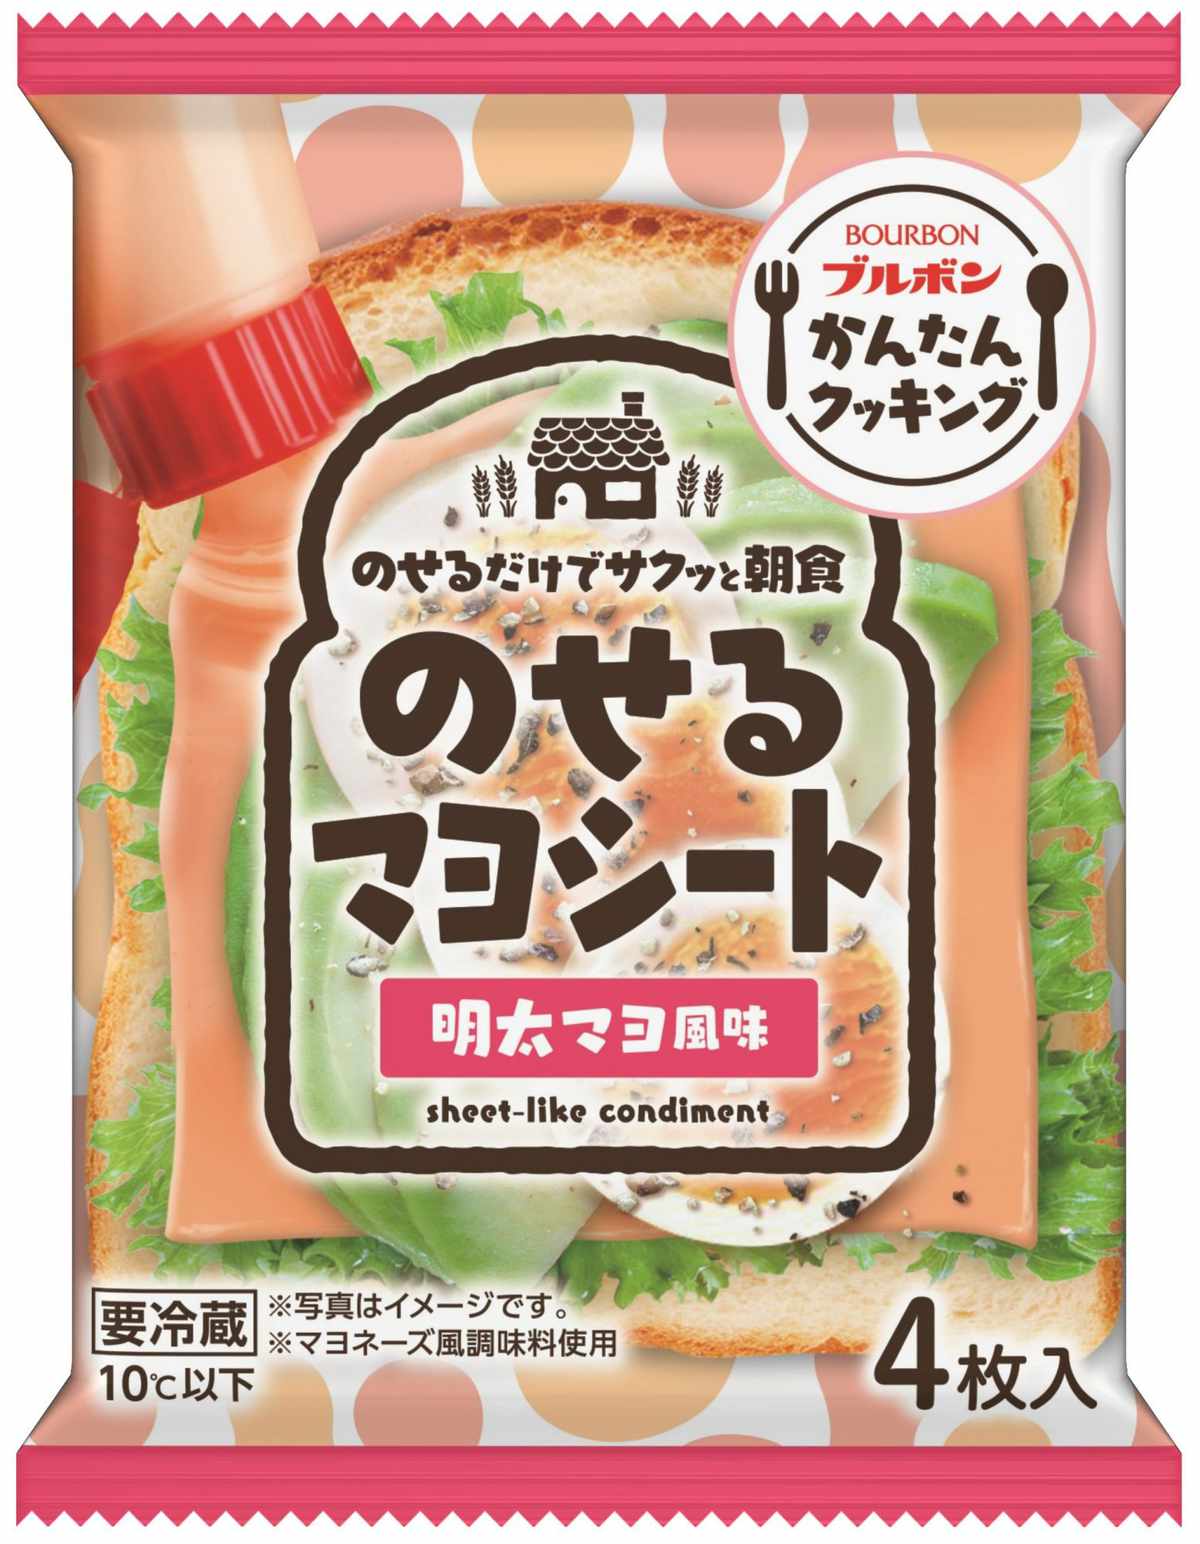 a package of mentaiko mayo slices